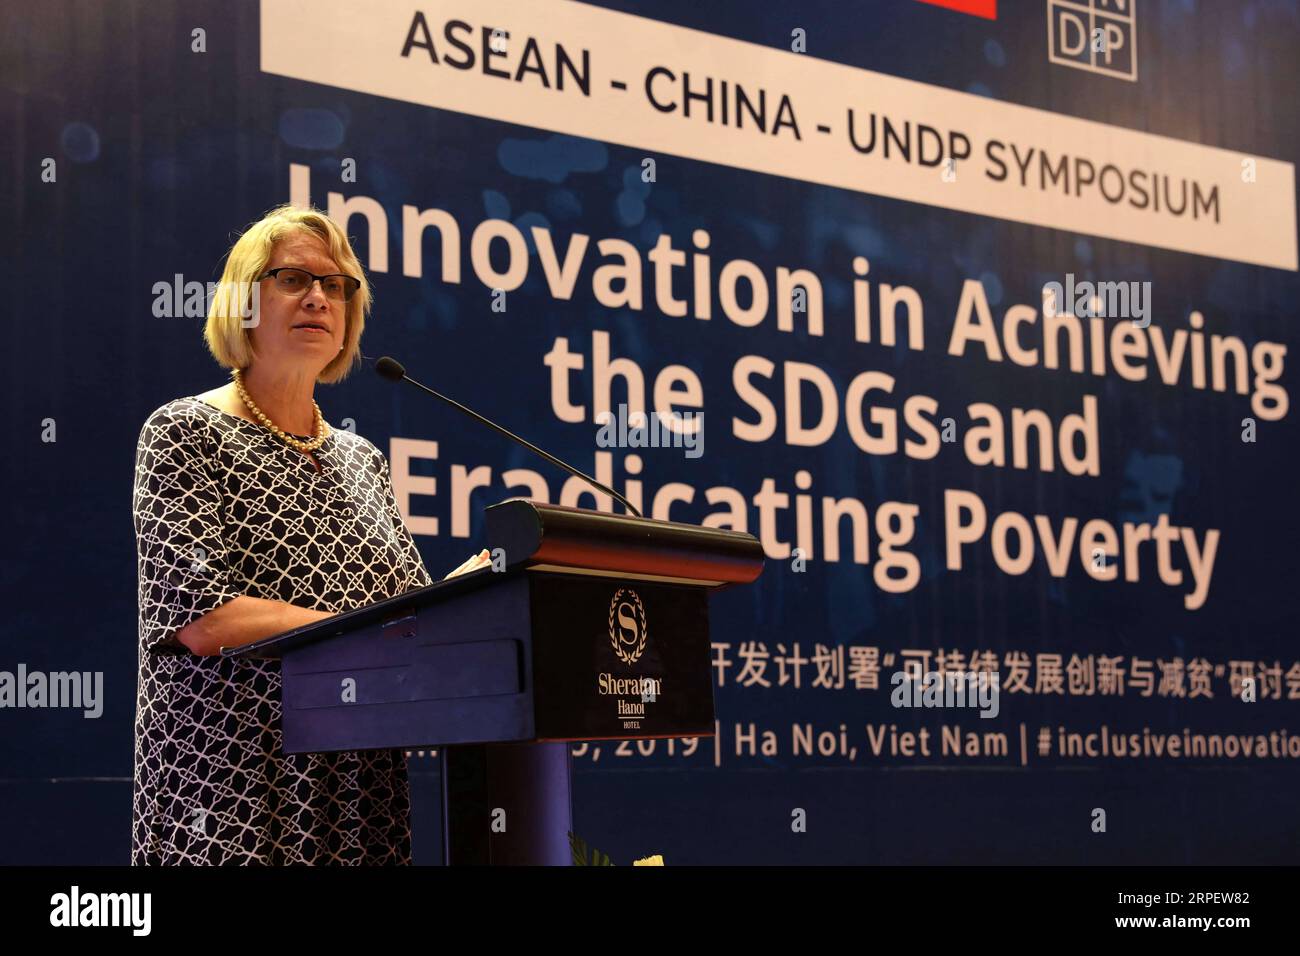 (190905) -- HANOI, Sept. 5, 2019 -- Valerie Cliff, deputy regional director for Asia and the Pacific of the United Nations Development Program (UNDP), addresss the opening ceremony of the ASEAN-China-UNDP symposium in Hanoi, capital of Vietnam, Sept. 4, 2019. The ASEAN-China-UNDP symposium Innovation in Achieving the Sustainable Development Goals and Eradicating Poverty kicked off here on Wednesday. The symposium, co-held by the Chinese Mission to the ASEAN, the ASEAN Secretariat and the UNDP, was designed as a forum where ASEAN countries, China and other nations in the Asia-Pacific region can Stock Photo